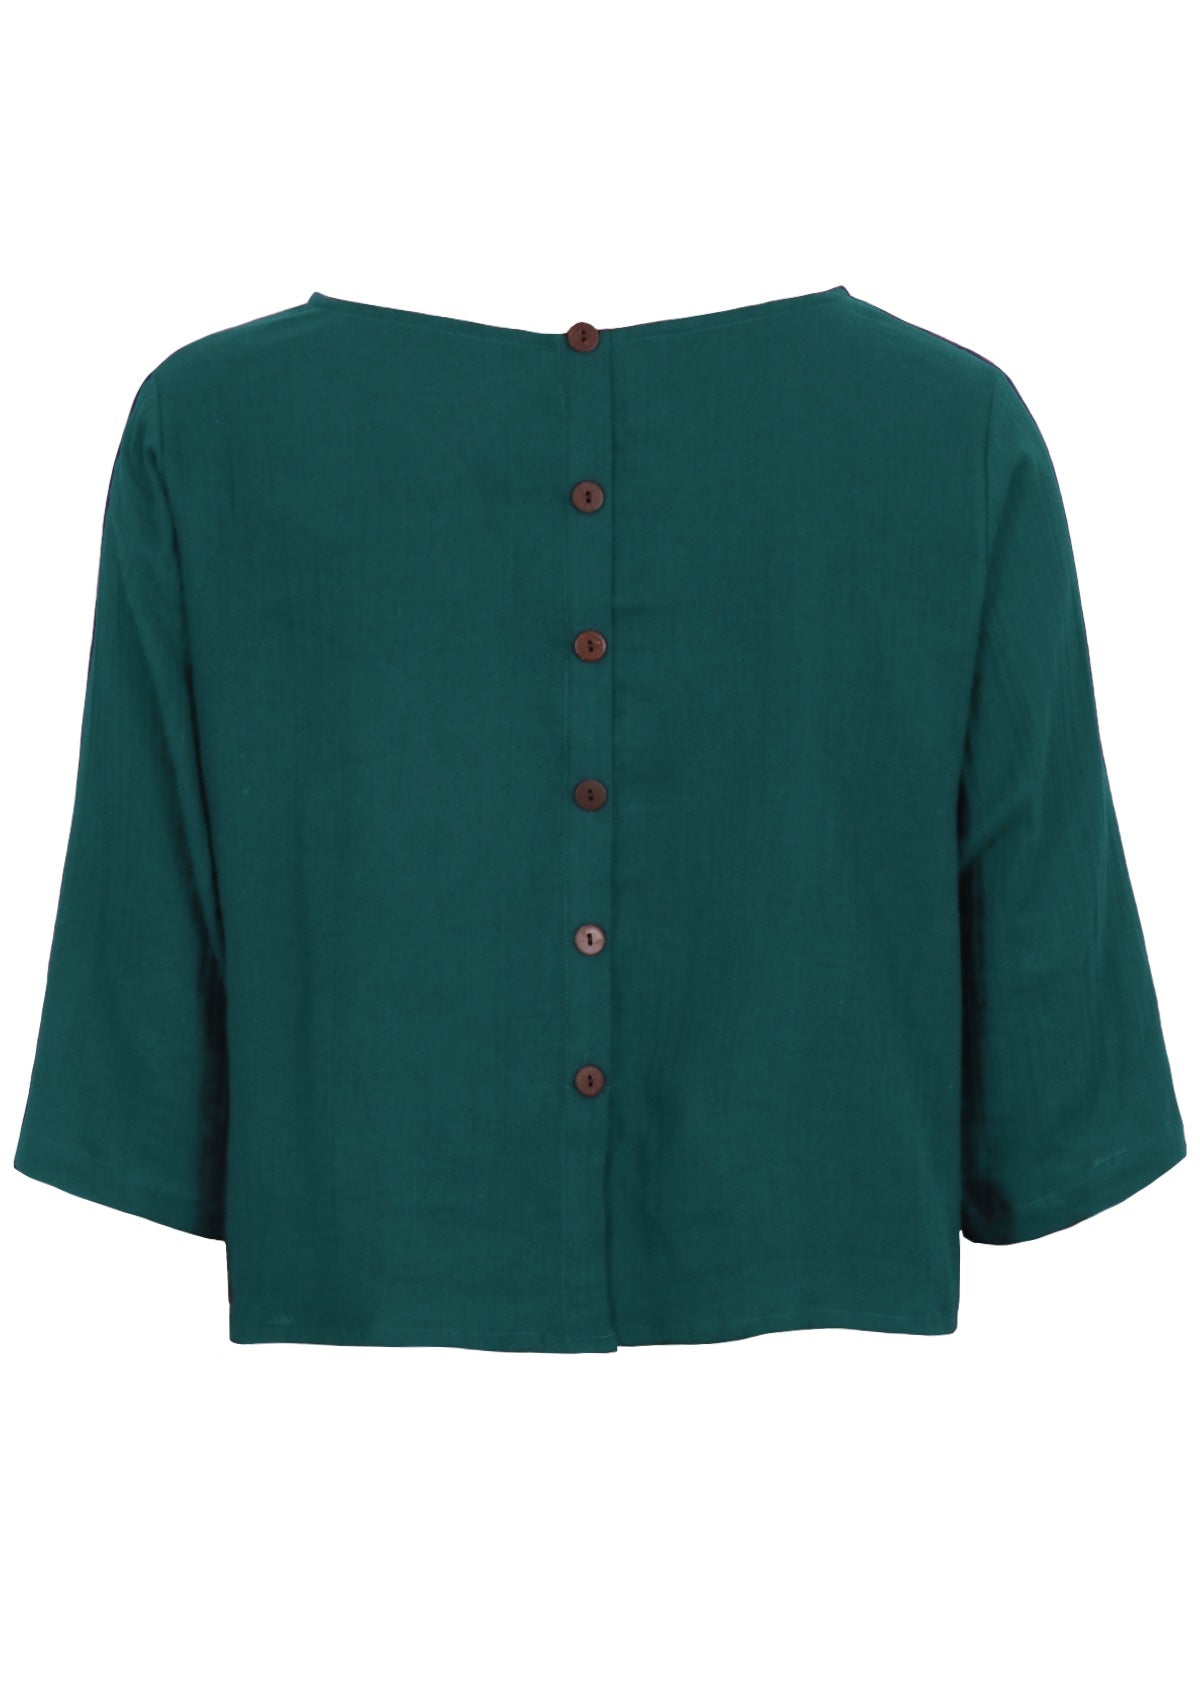 Double cotton top in deep teal with decorative buttons centre back